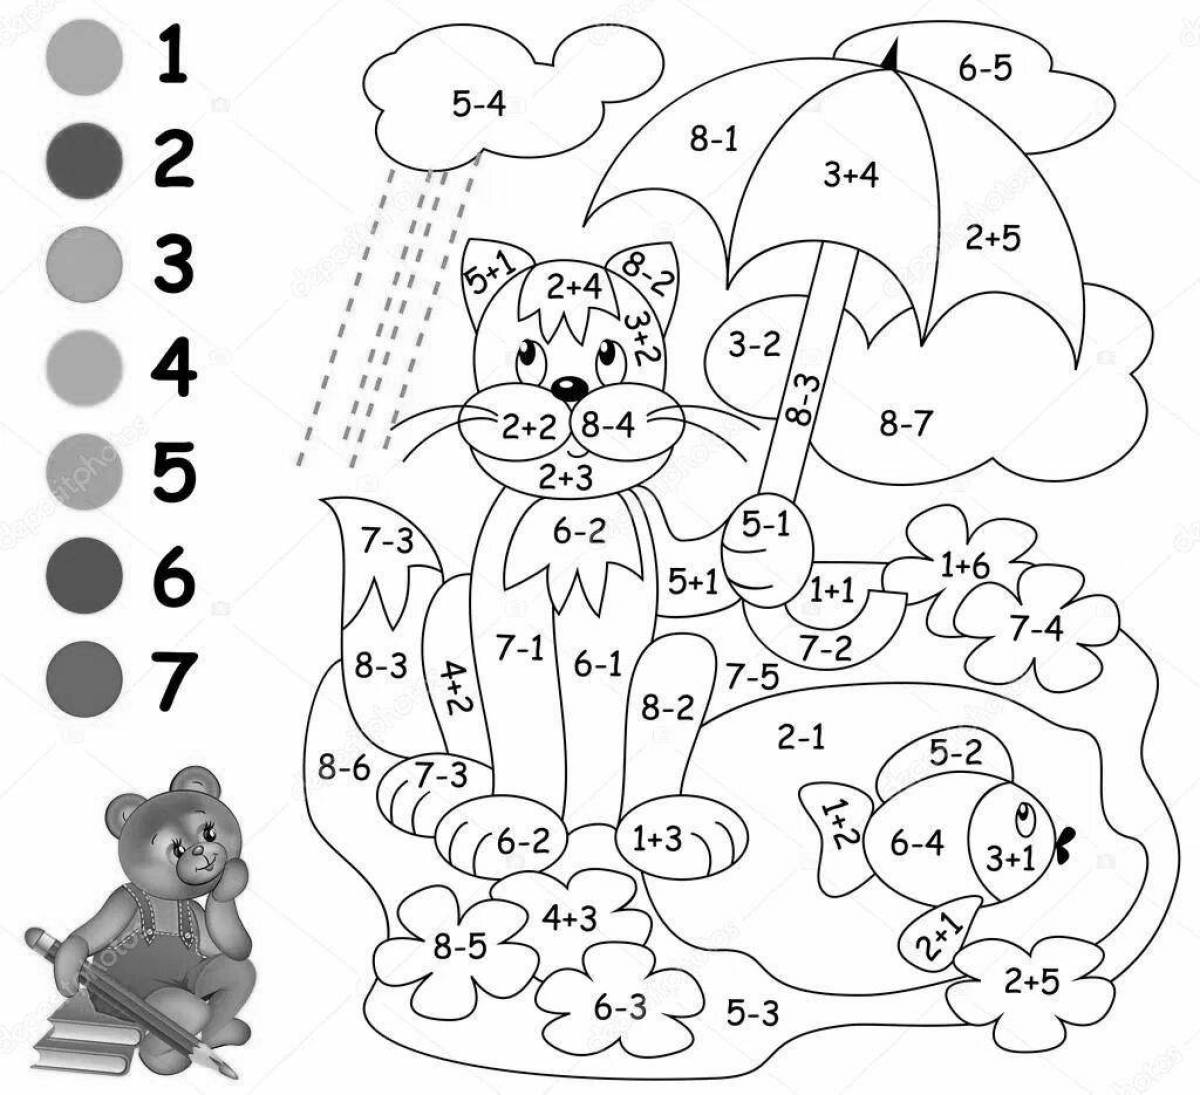 Color-explosion coloring page by numbers math